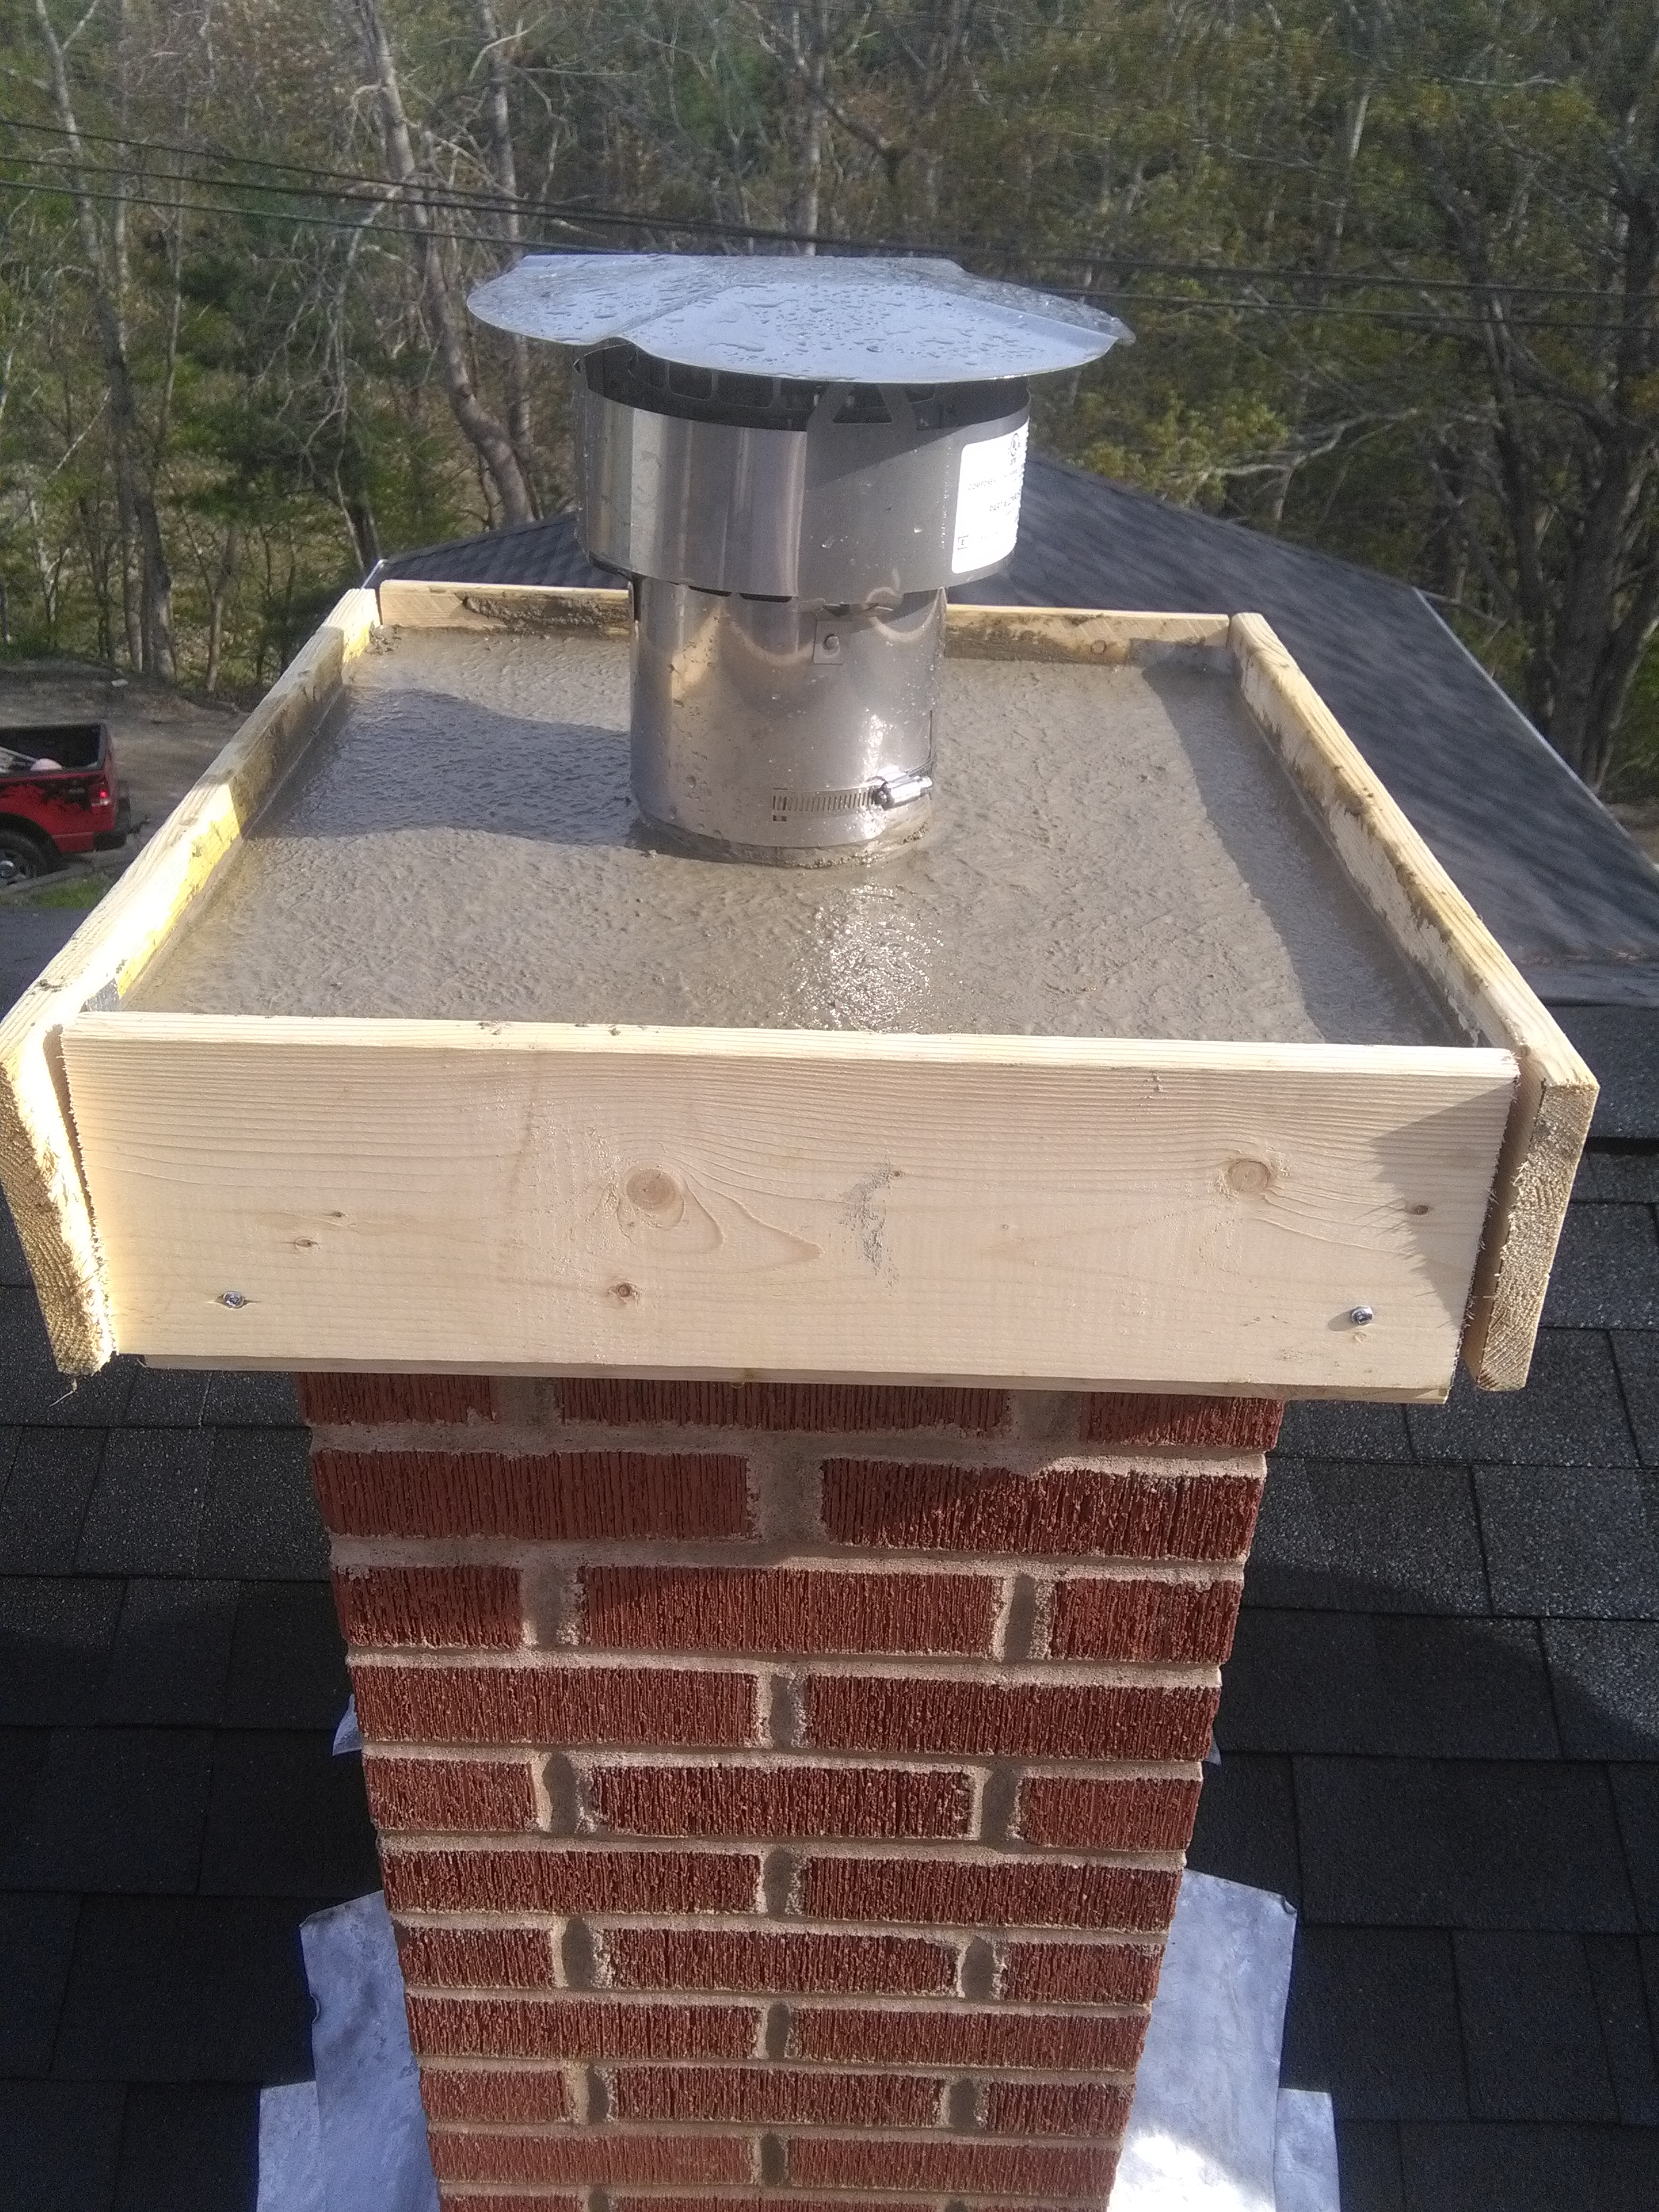 image of chimney construction services completed in Fall River, NS by Pro Chimney Services based in Halifax, NS servicing all of the Halifax-Dartmouth Regional Municipality, Bedford, Sackville, Mount Uniacke, Windsor, Hantsport , Wolfville, Kentville, Chester, Mahone Bay, Lunenburg, Bridgewater, Liverpool, Fall River, Wellington, Enfield, Elmsdale, Brookfield, Truro, Musquodoboit Harbour & surrounding areas..